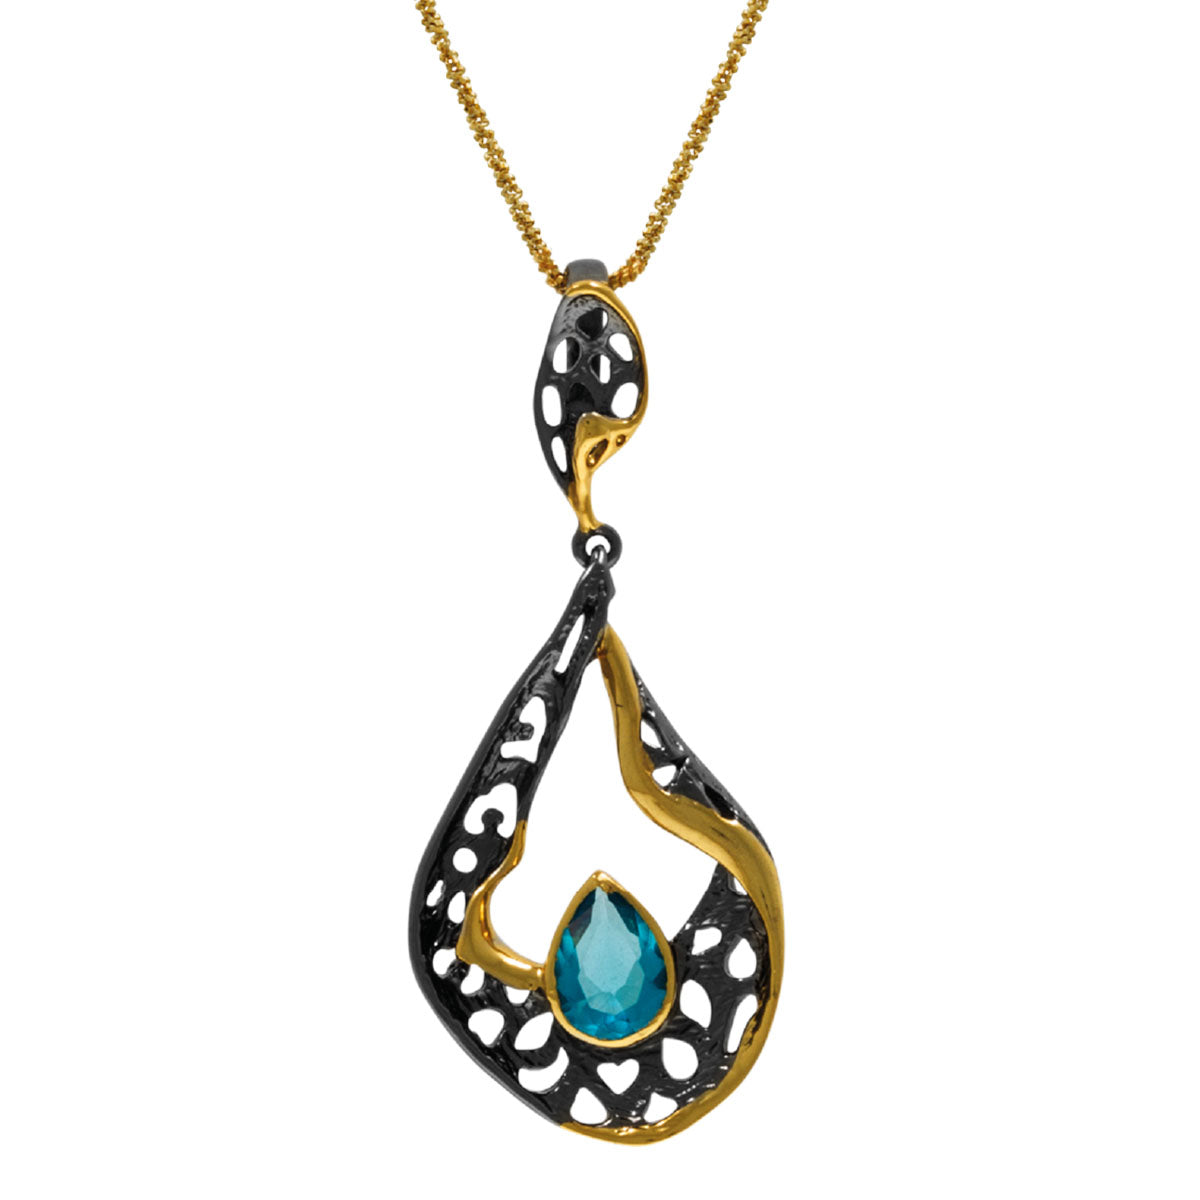 Handmade Silver Necklace With Back And Gold Plating And Semi-Precious Stones (Zircon)